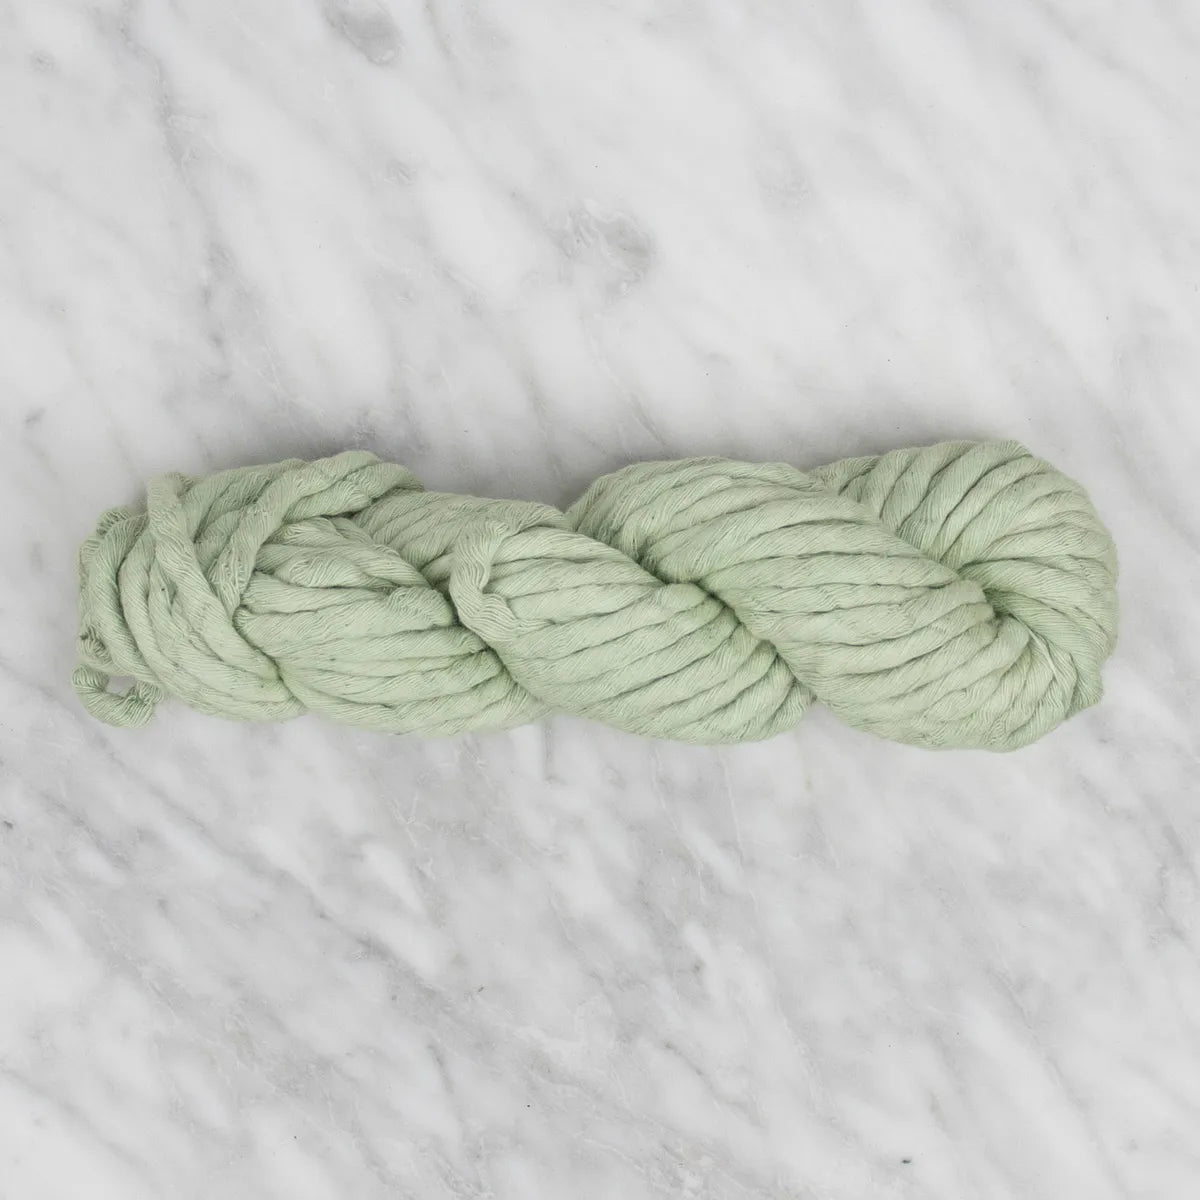 5mm Hand-Dyed Cotton String - Mint - 100 grams